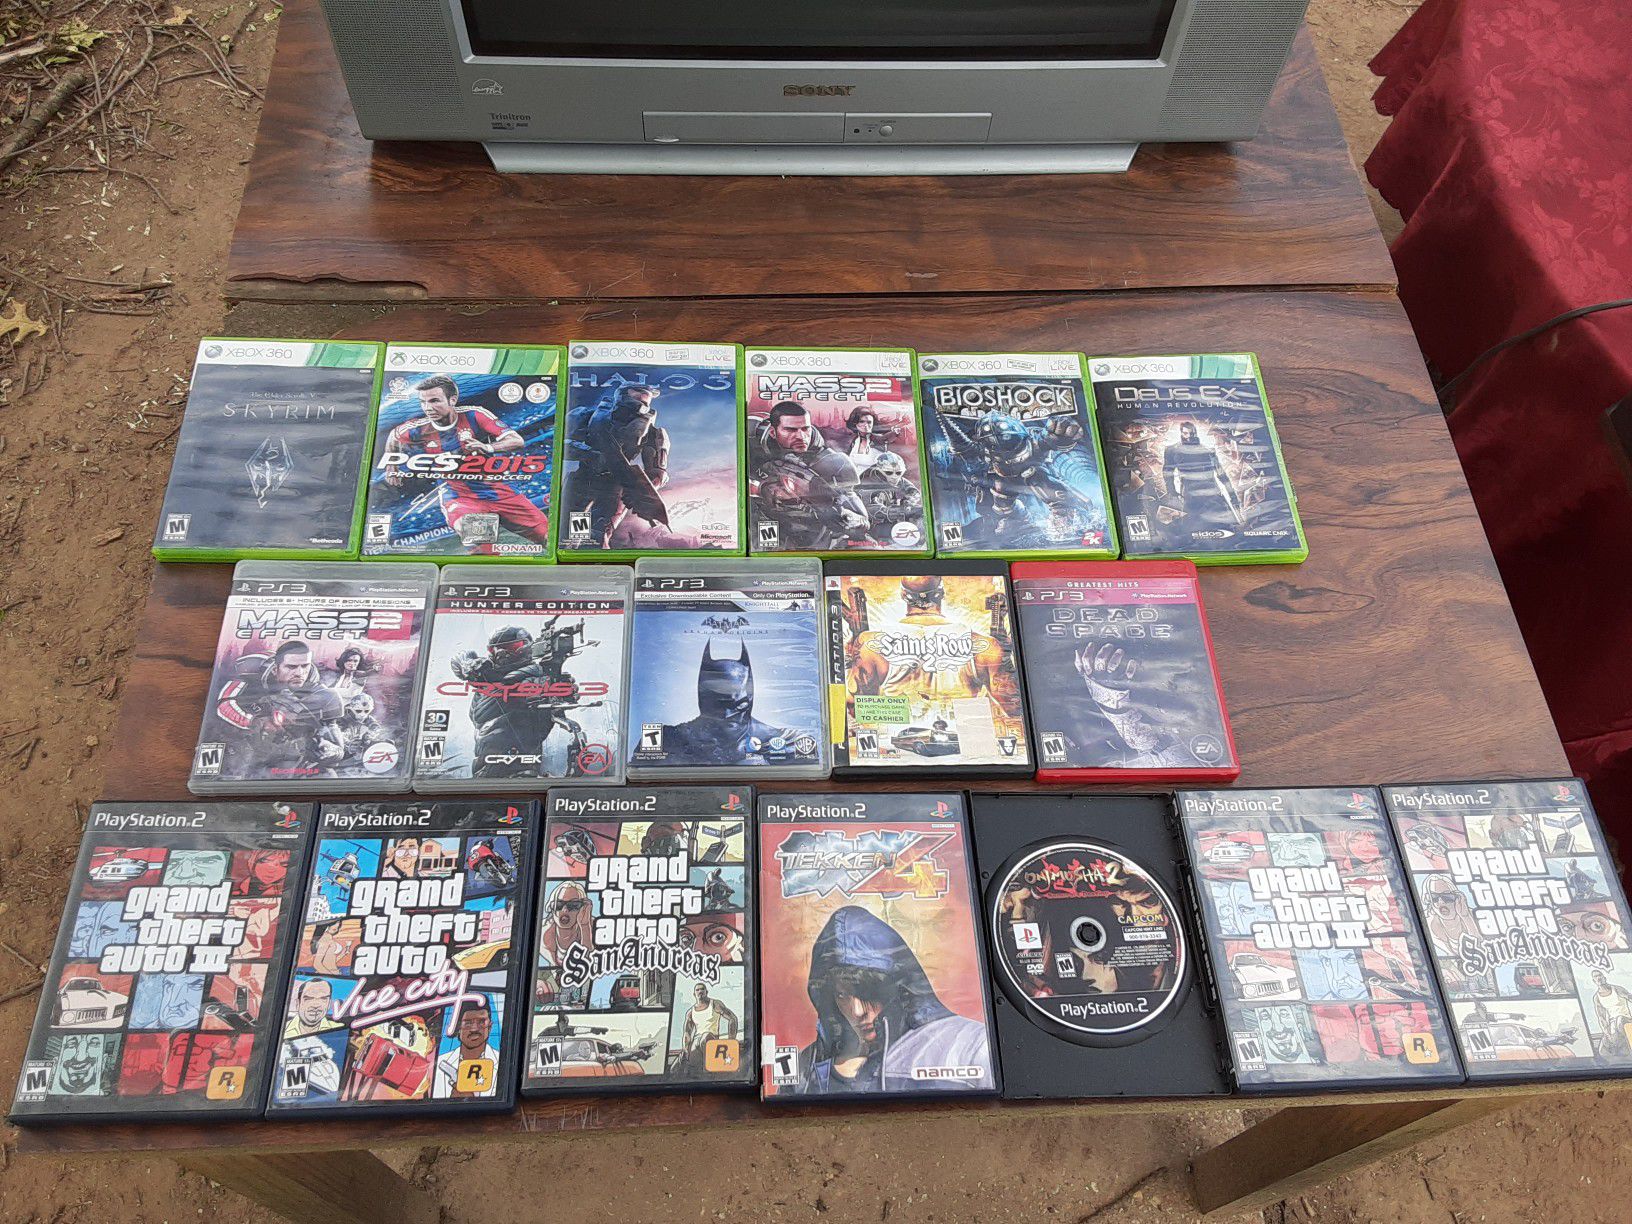 PS3, PS2 and Xbox 360 great condition games and Sony Sony TV